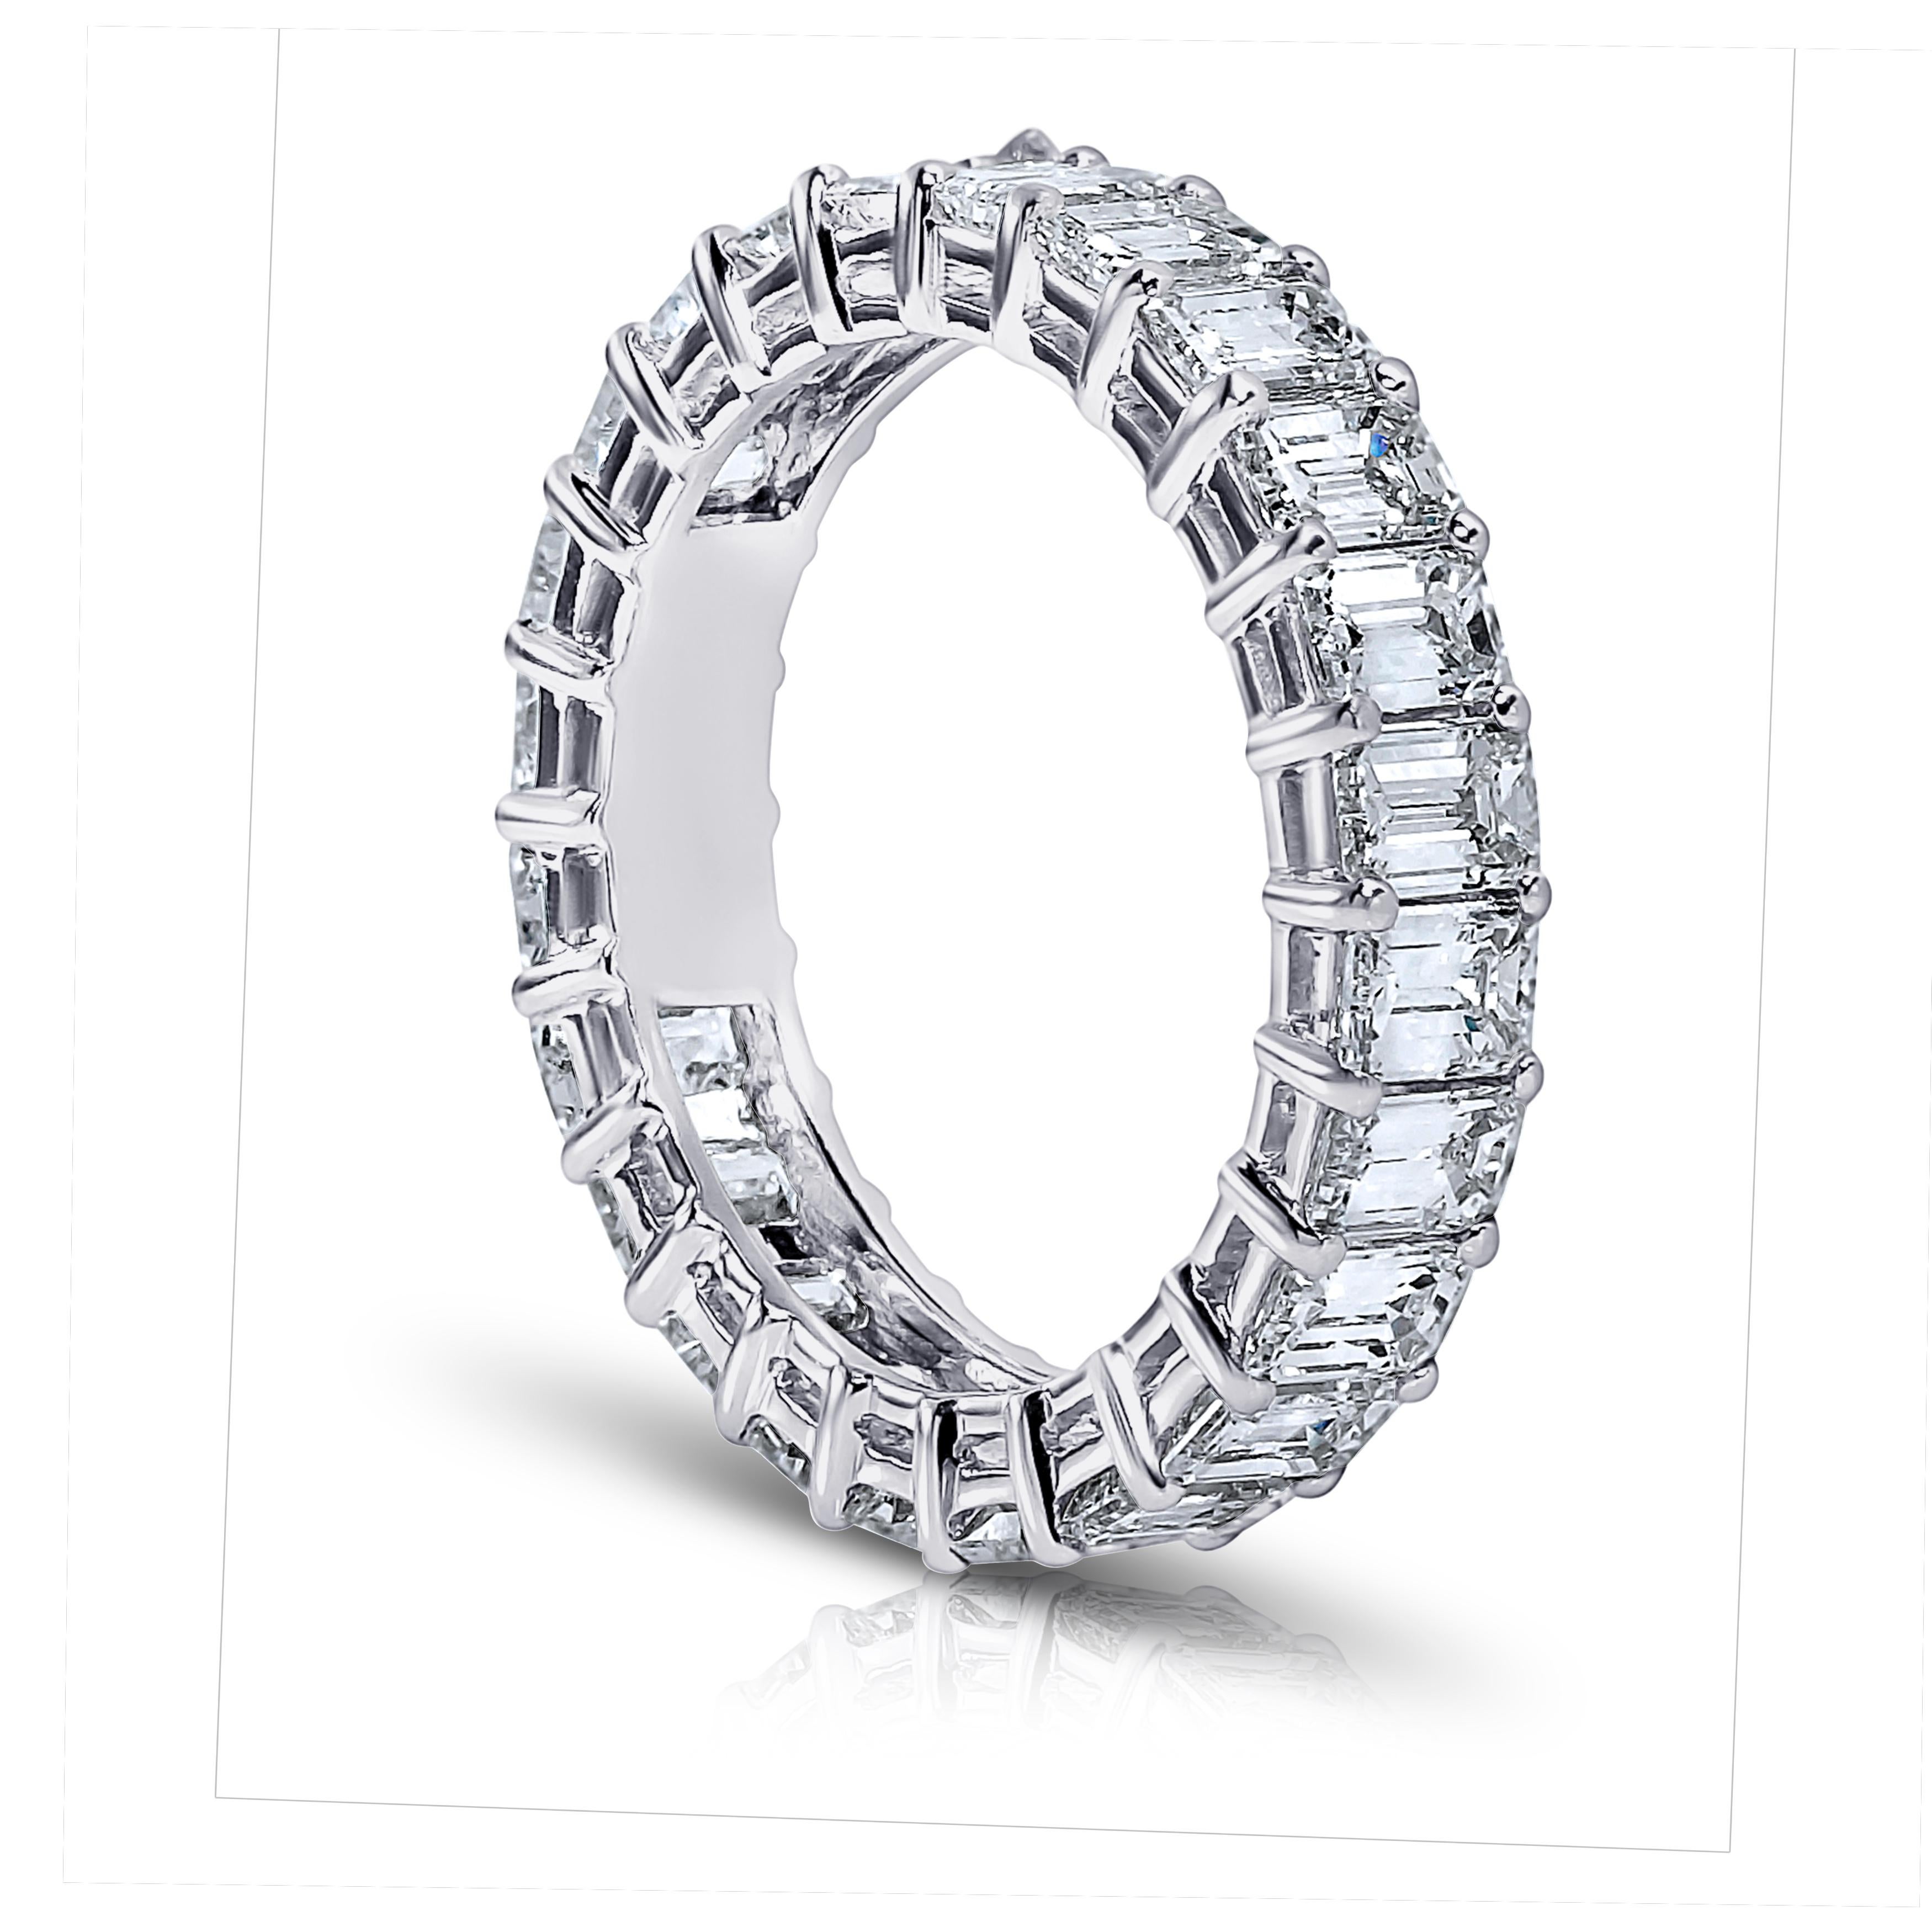 Emerald Cut diamond ring platinum eternity band shared prong style with a gallery. Finger size 6 .
 British finger size L1/2 . European finger size 51.5 . 
Other finger sizes available.

20 perfectly matched diamonds weighing a minimum of 6.00 cts.